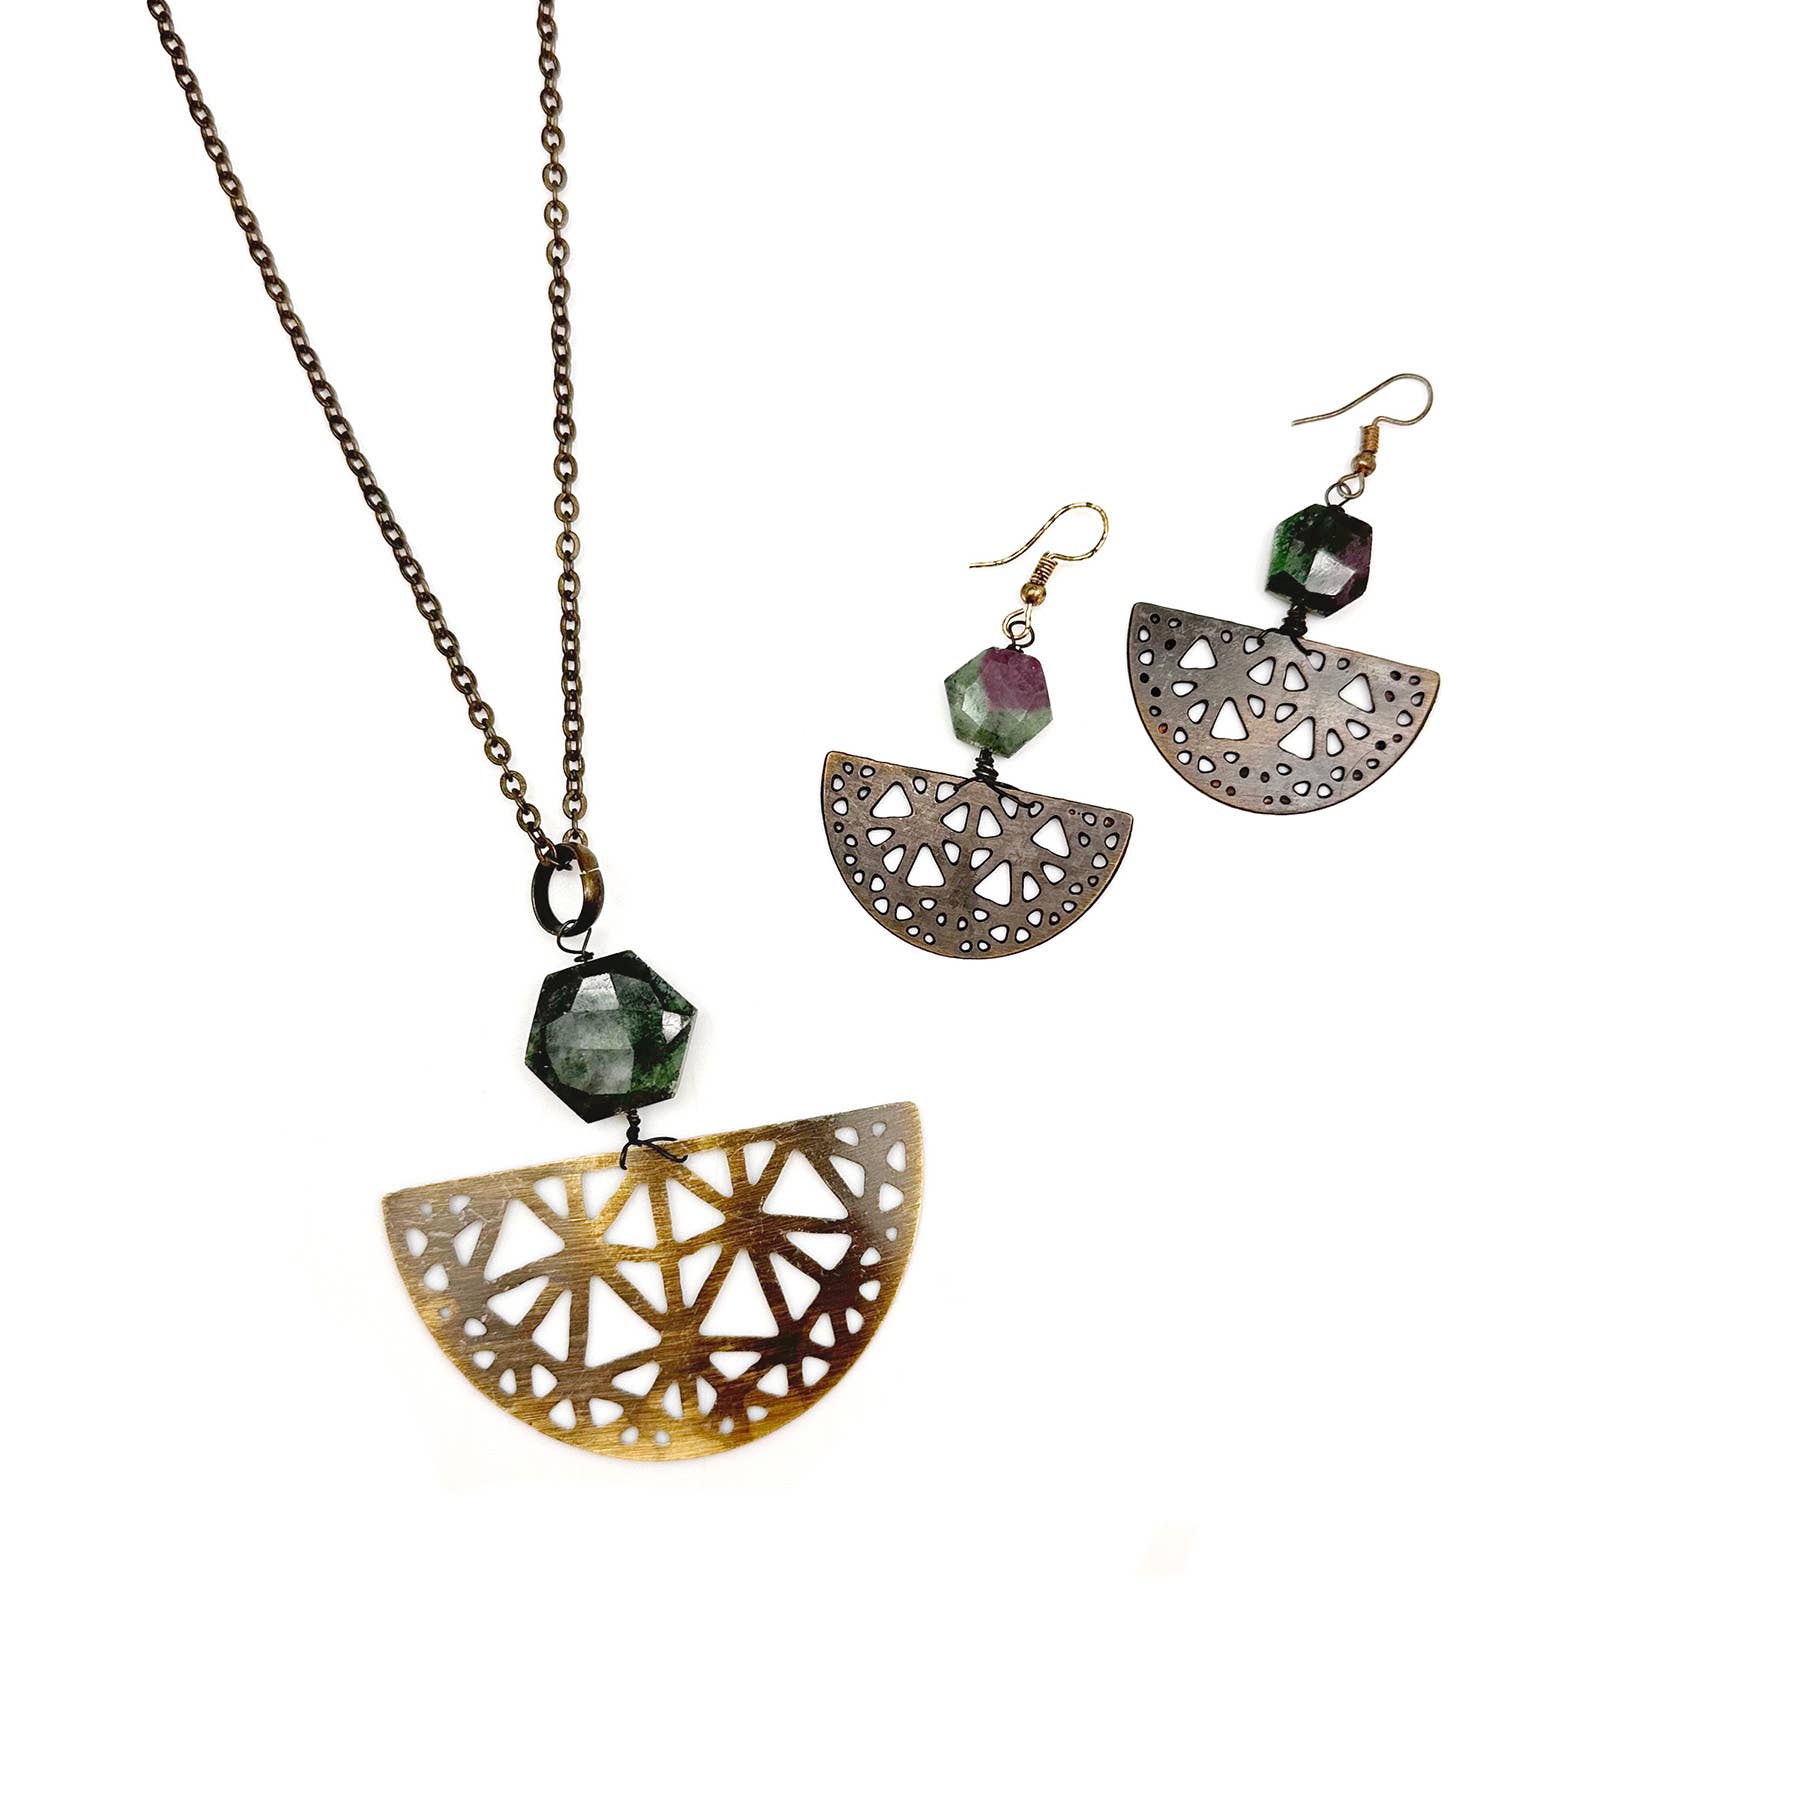 Banjara Collection Necklace - Ruby Zoisite, Brass Filigree